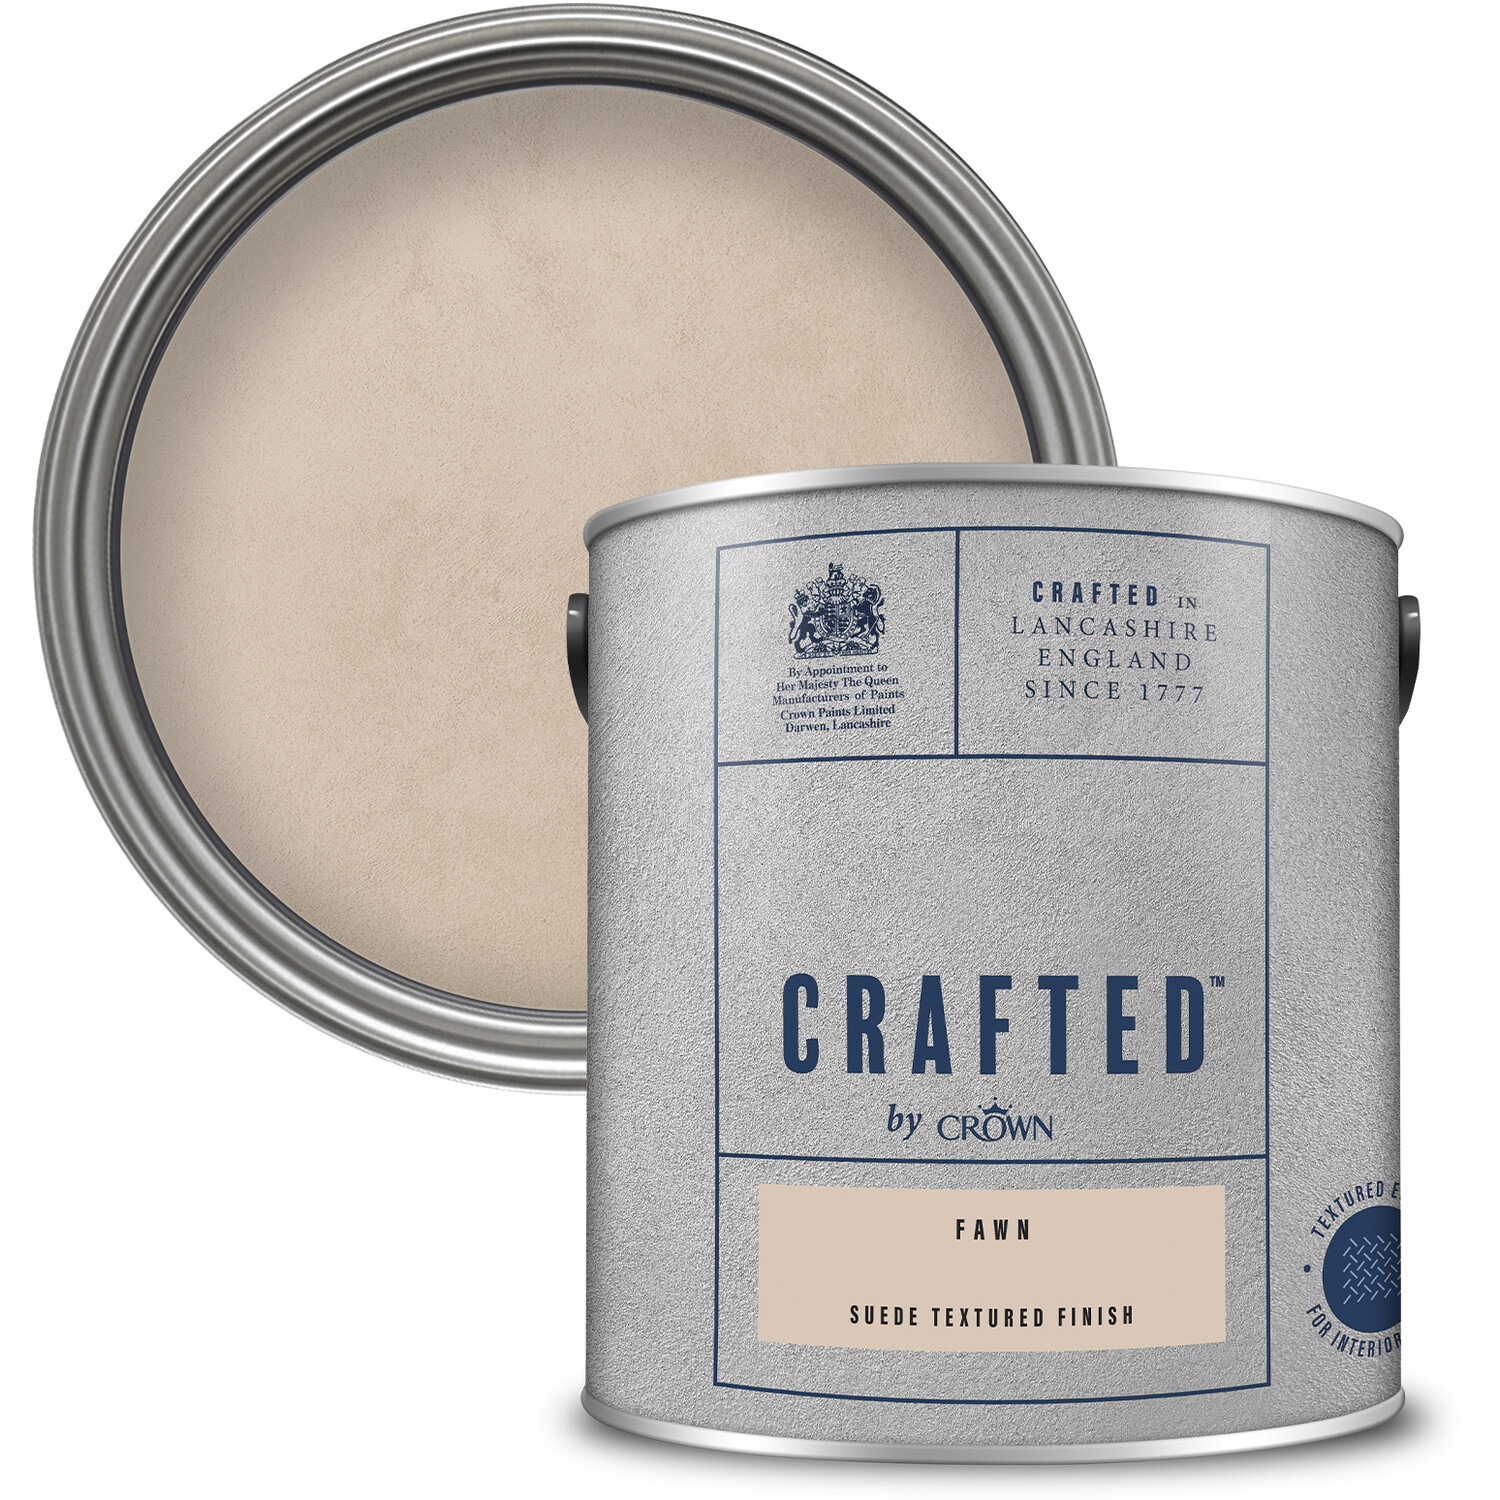 Crown Crafted Walls Fawn Suede Textured Finish Paint 2.5L Image 1